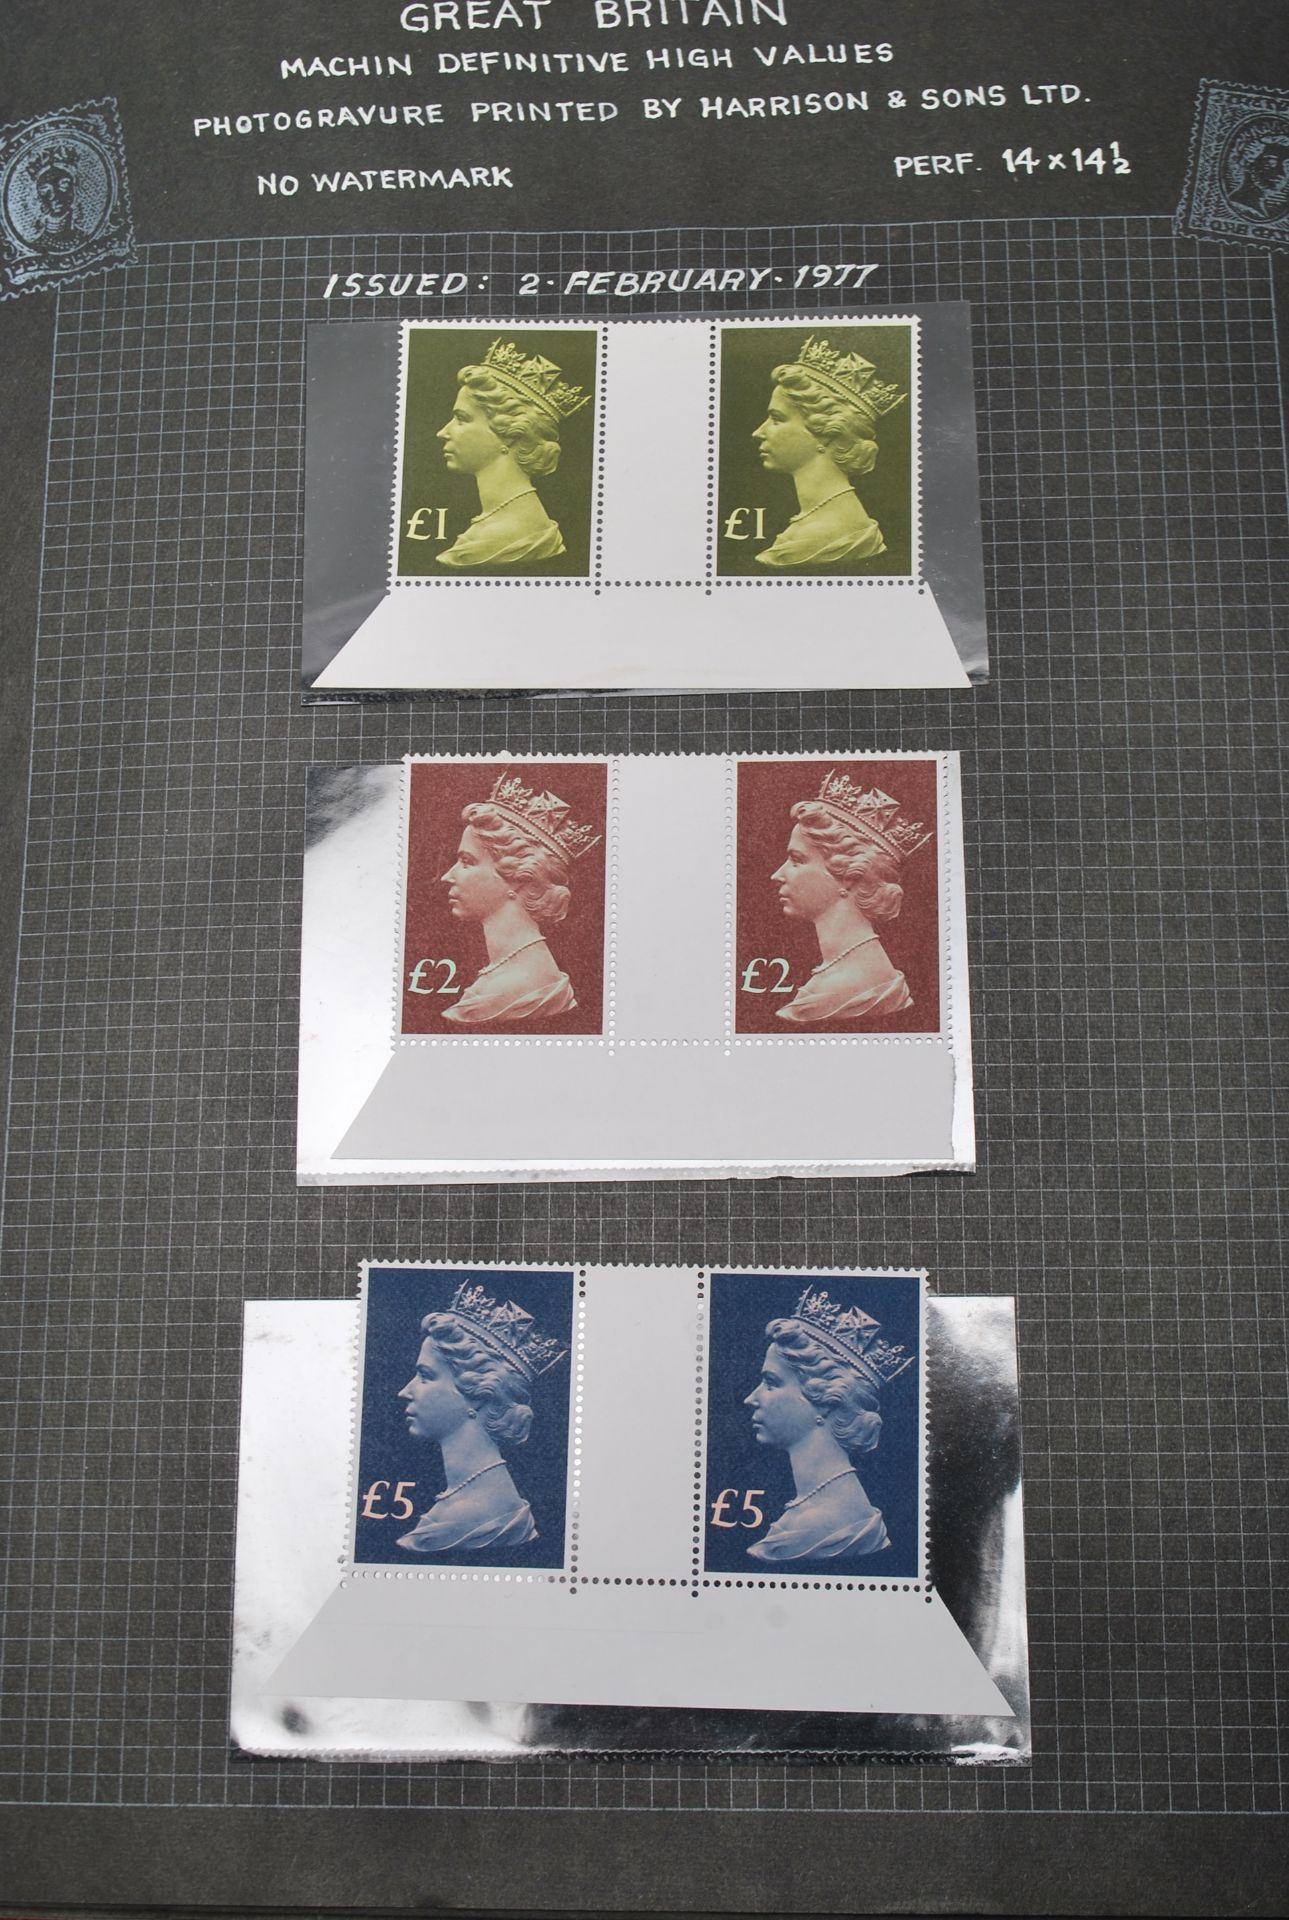 THREE ALBUMS OF MACHIN DEFINITIVE STAMPS + PRESENTATION - Image 8 of 25